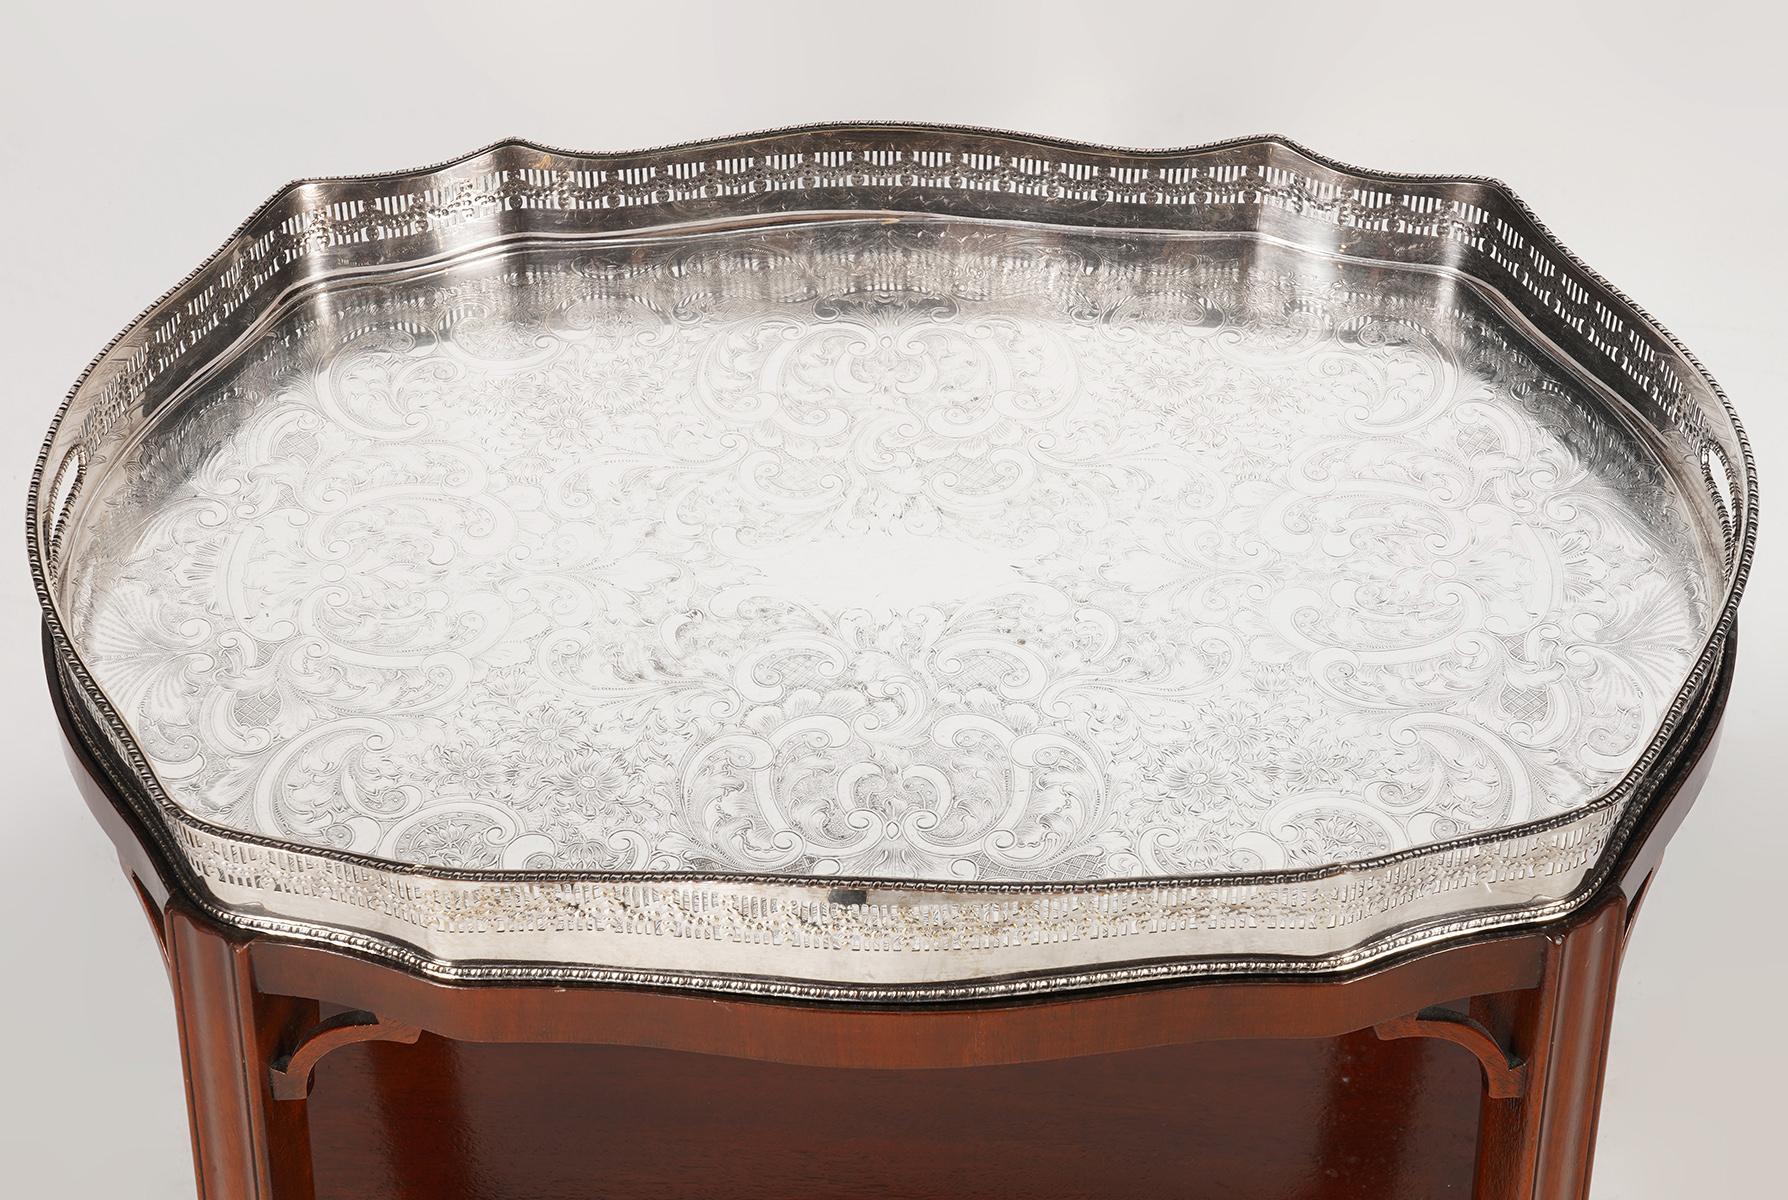 This elaborately chiseled silver plate tray with reticulated gallery rests on a custom made Chippendale mahogany stand with slightly splayed legs united by a shaped lower shelf, 20th century. The tray is resting on a velvet lined surface and has a